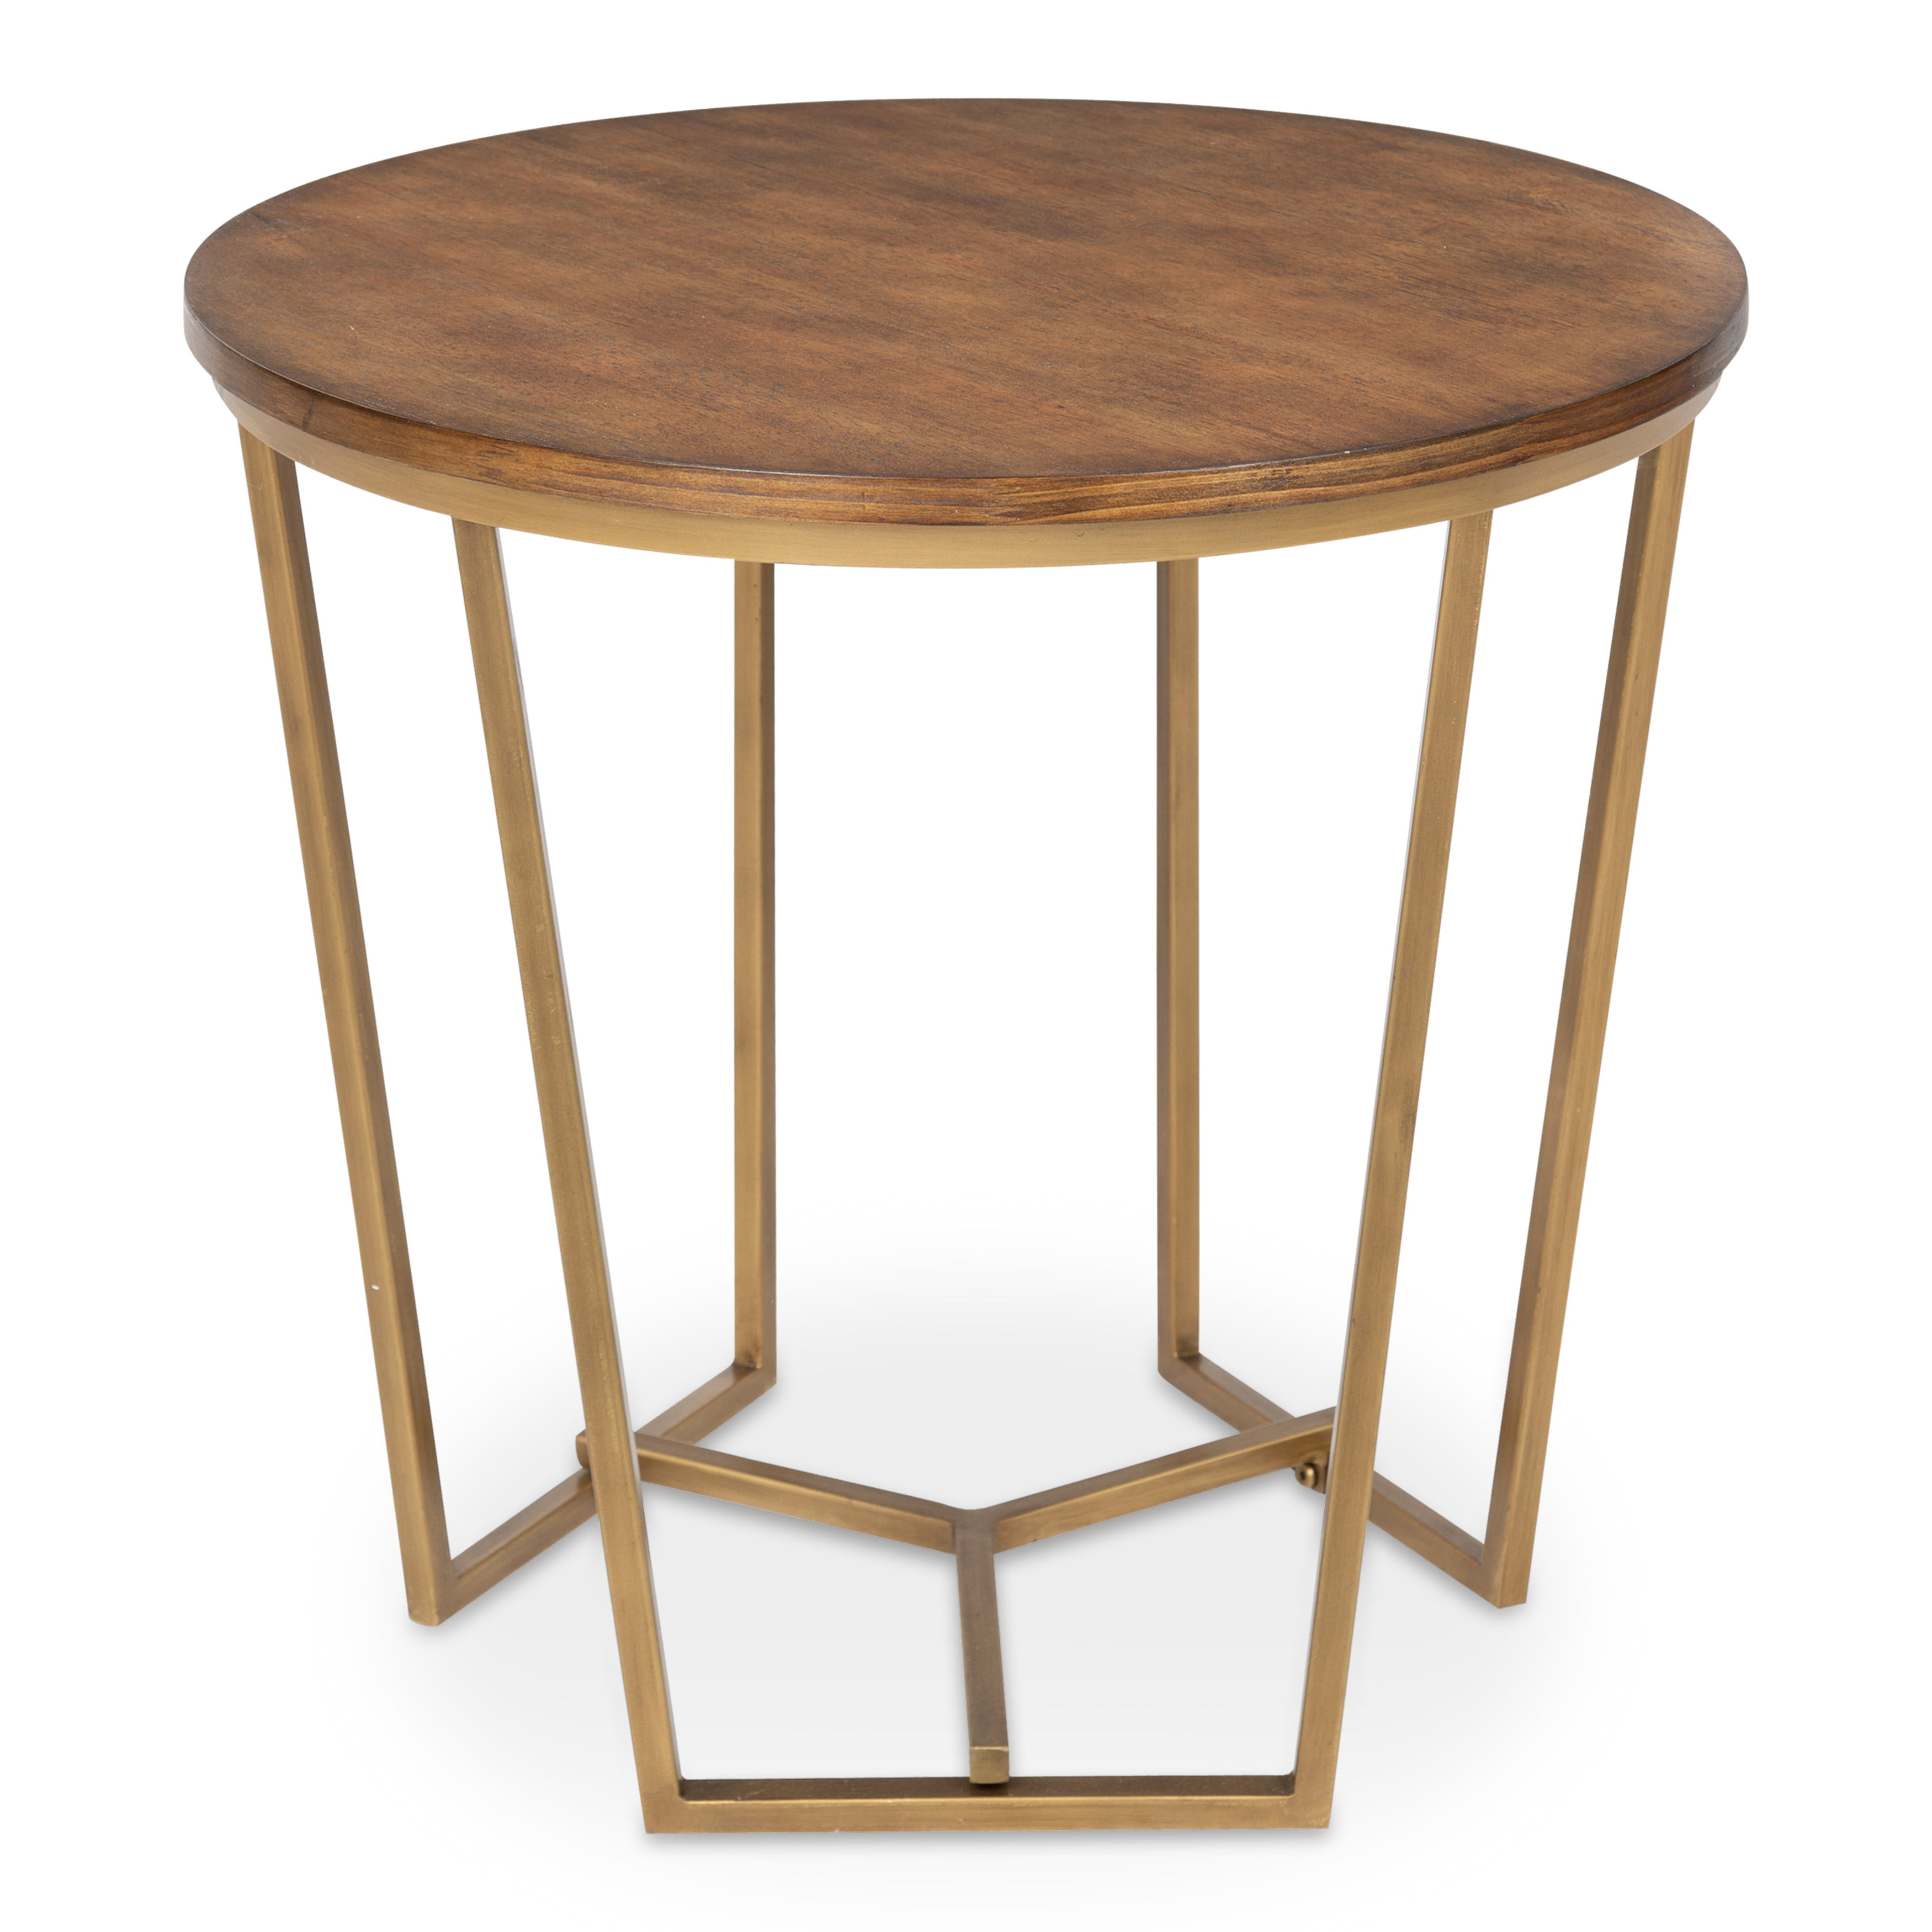 Kate and Laurel Solvay Round Wood and Metal Side Accent Table, Walnut